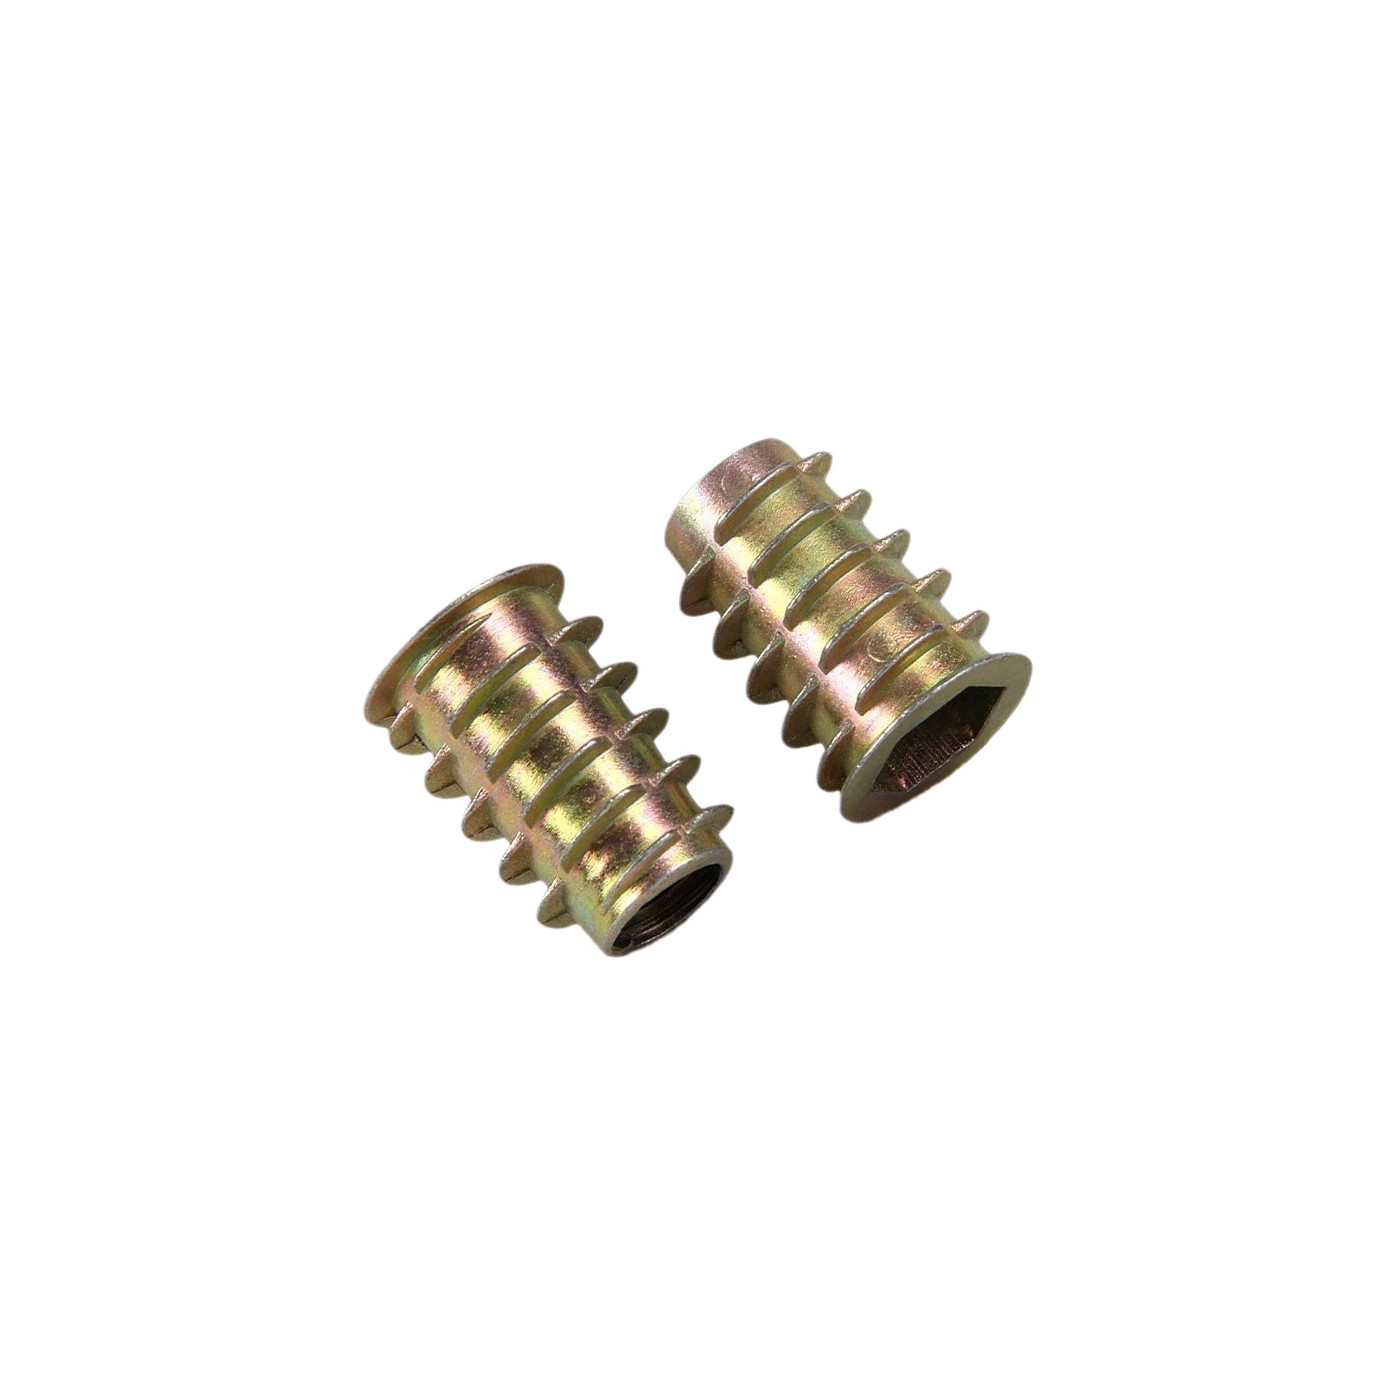 Set of 50 threaded inserts (screw-in nuts, M10x15 mm)